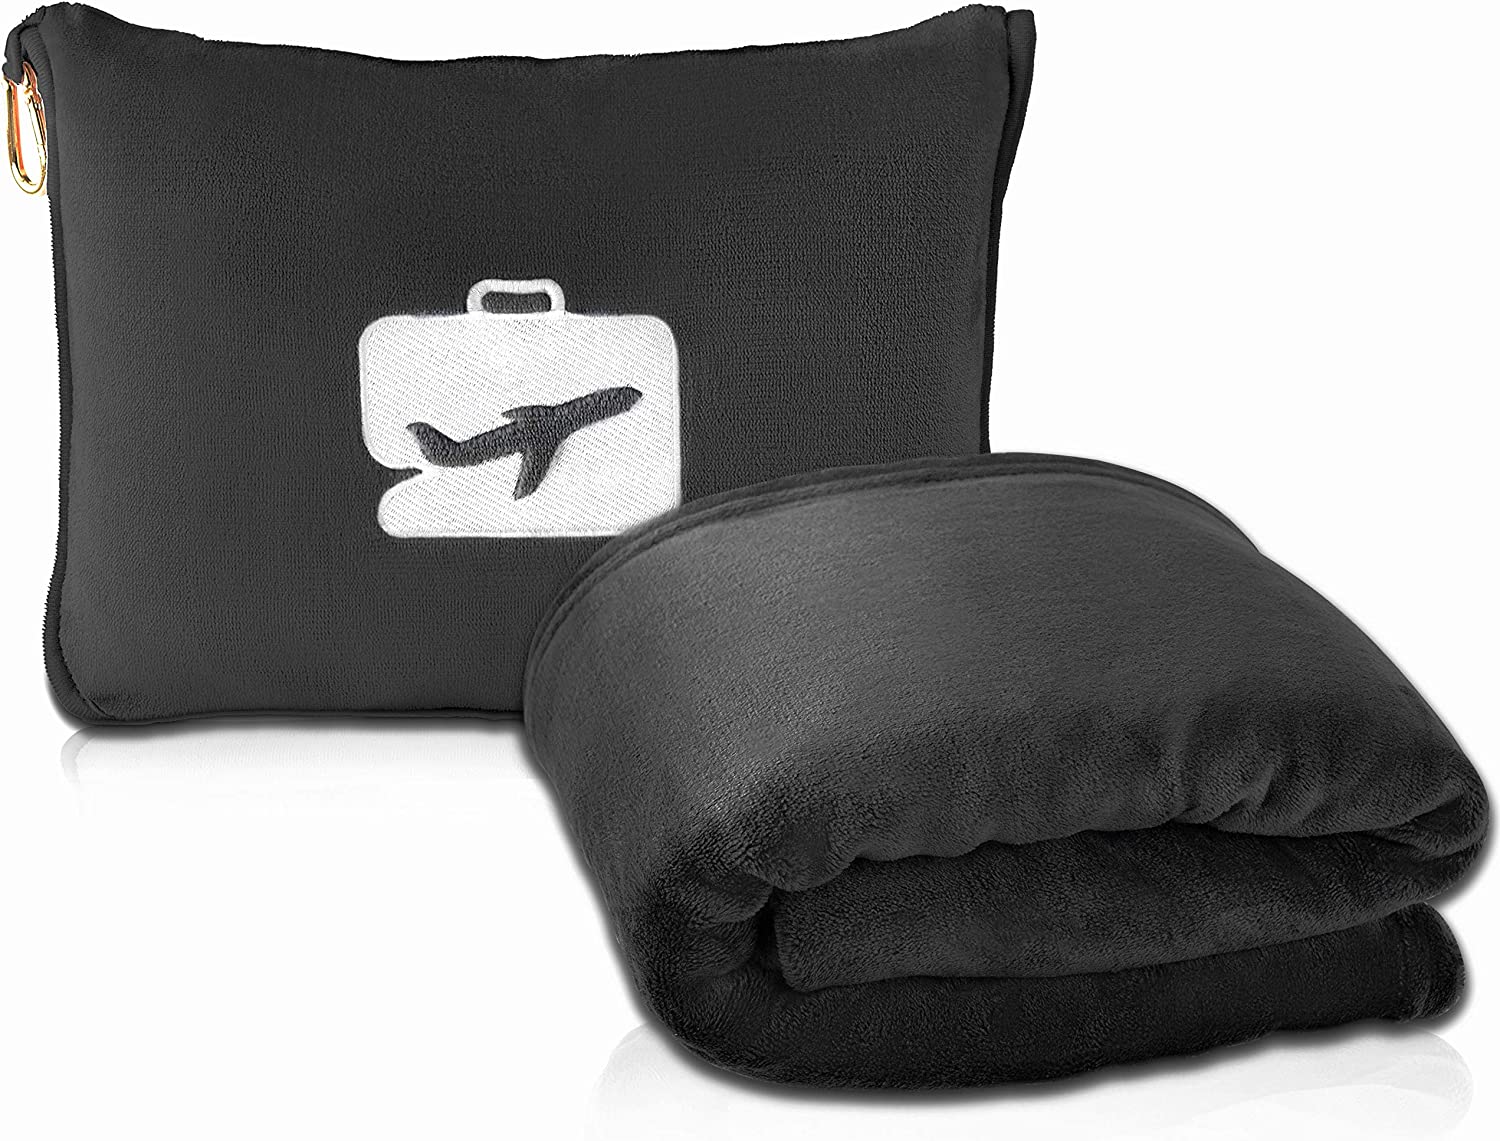 EverSnug Travel Blanket and Pillow - Premium Soft 2 in 1 Airplane Blanket with Soft Bag Pillowcase, Hand Luggage Sleeve and Backpack Clip (Black) by EverSnug on Amazon - honeymoon gift ideas for newlyweds - The Wedding Club